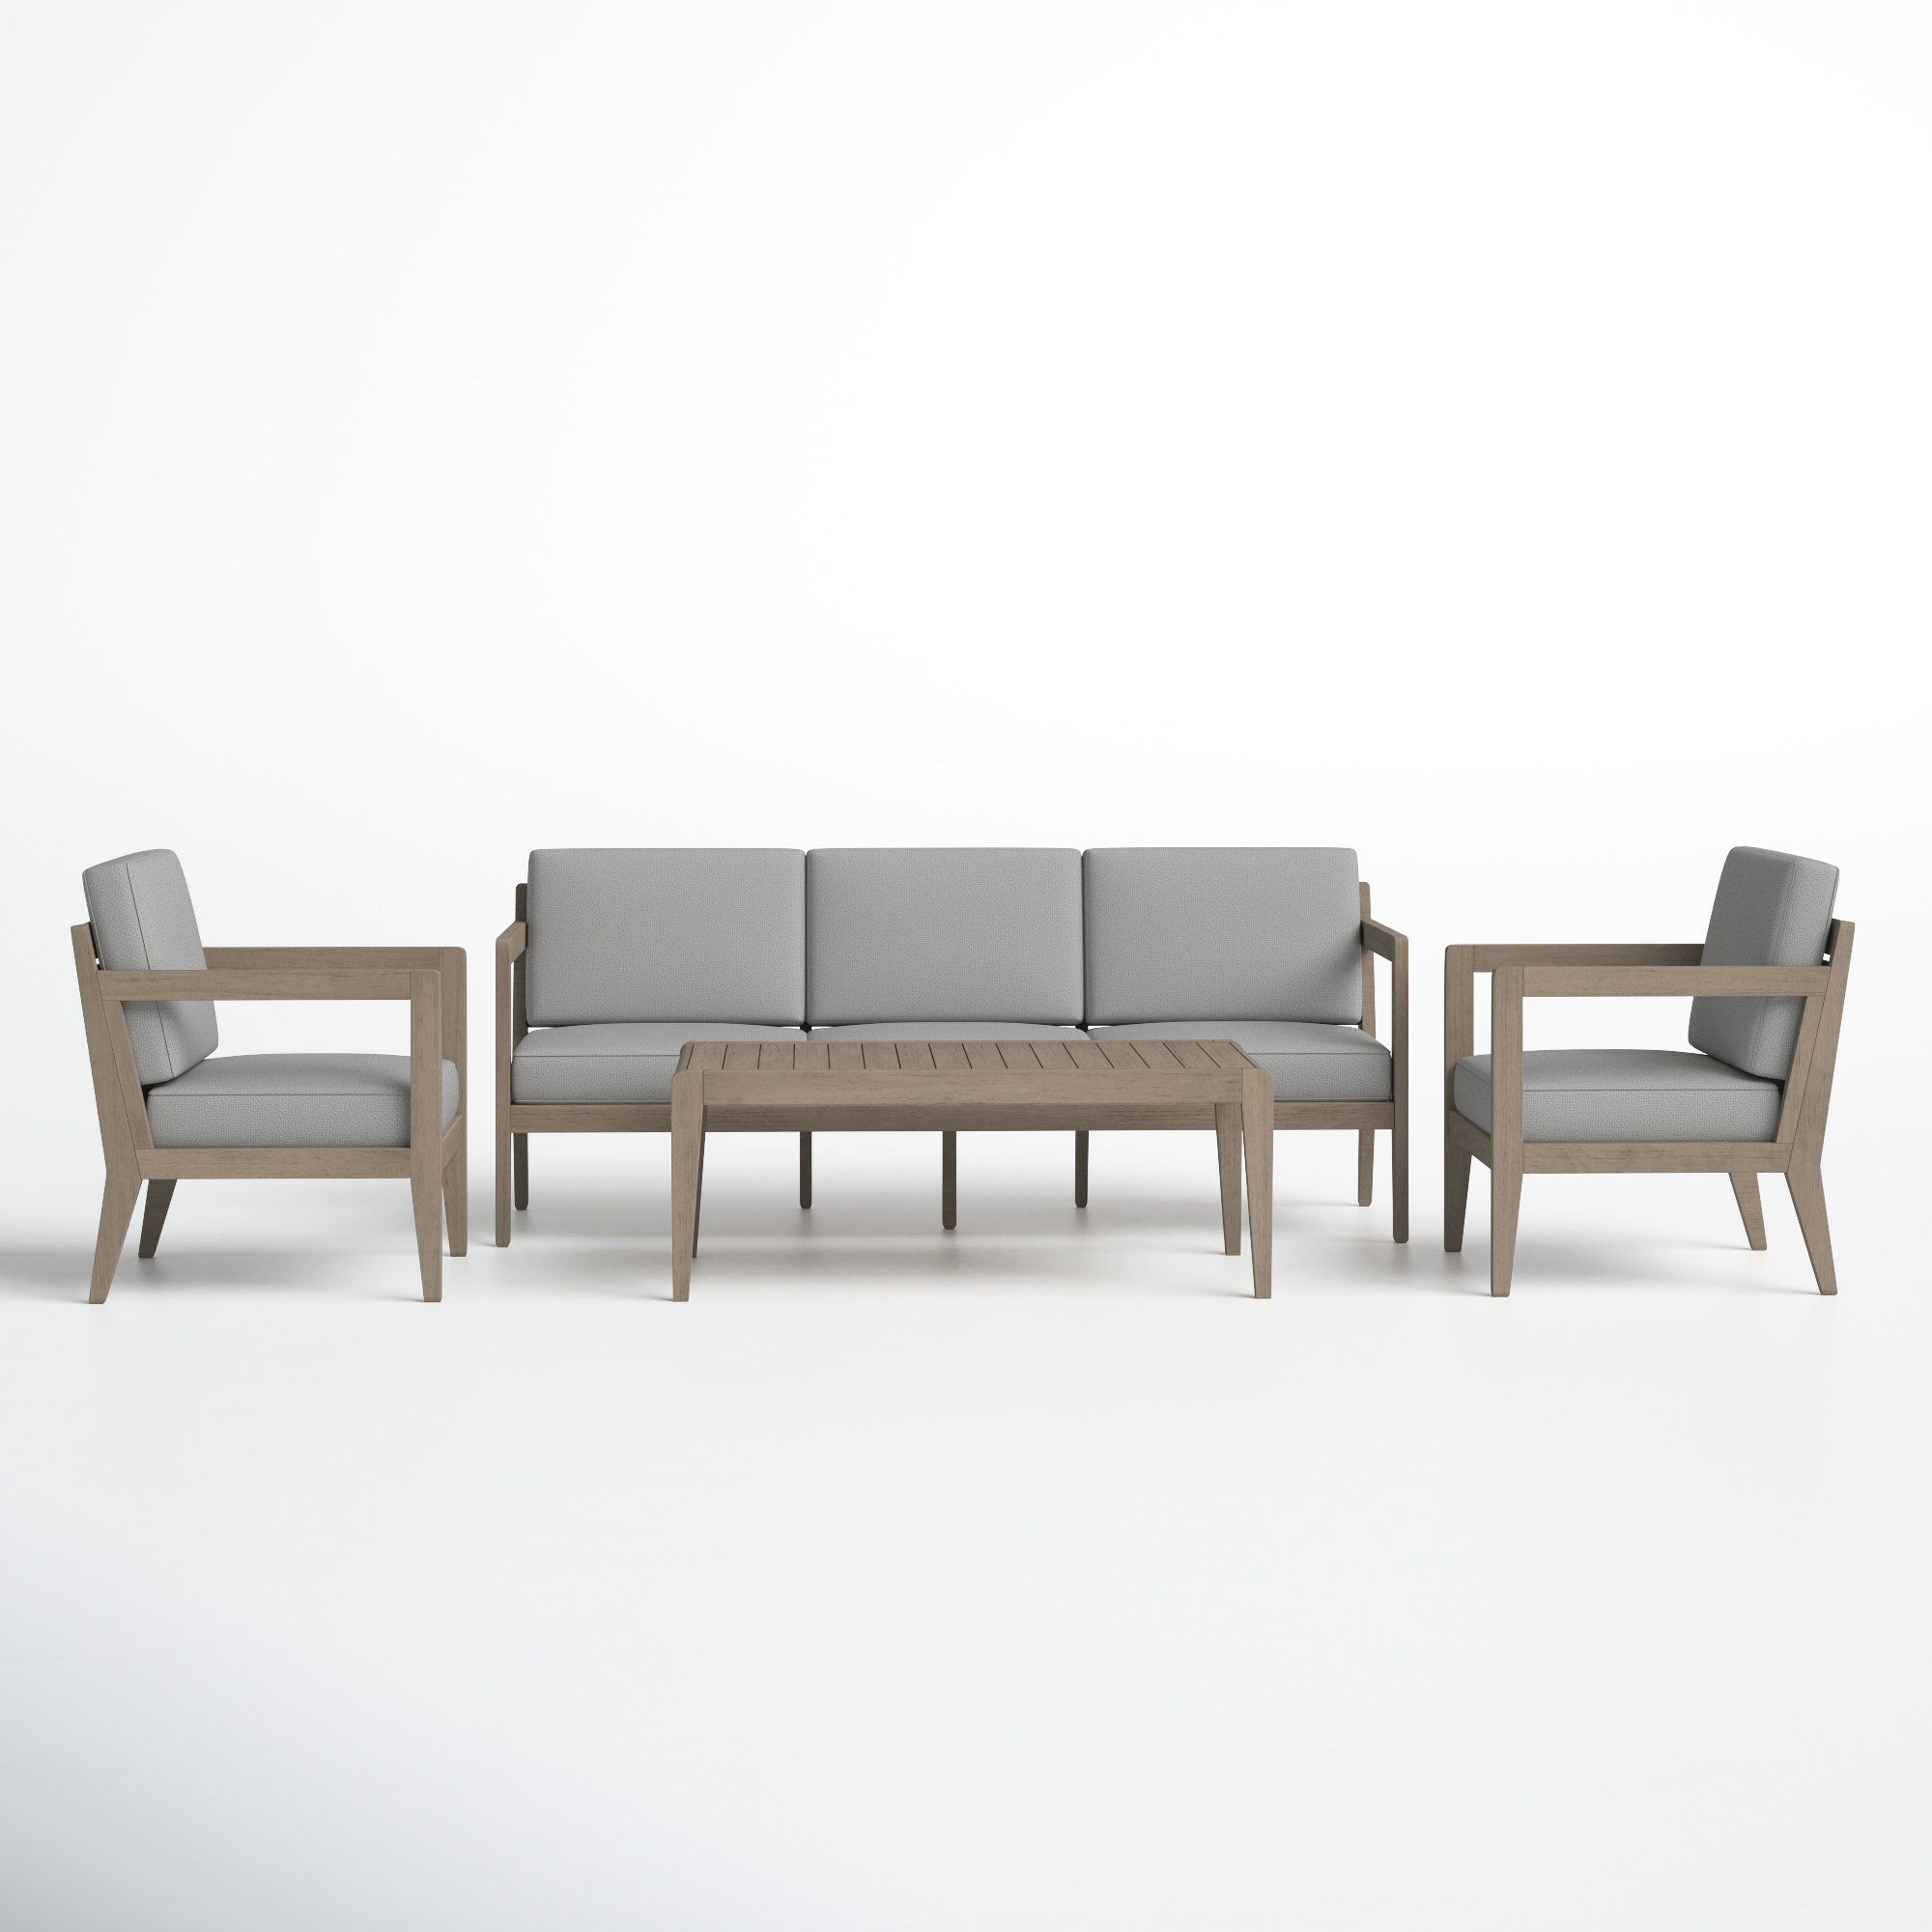 Ojai 4 Piece Outdoor Set, With Sofa, Coffee Table, And 2 Lounge Chairs &  Reviews | Joss & Main In Outdoor 2 Arm Chairs And Coffee Table (View 8 of 15)